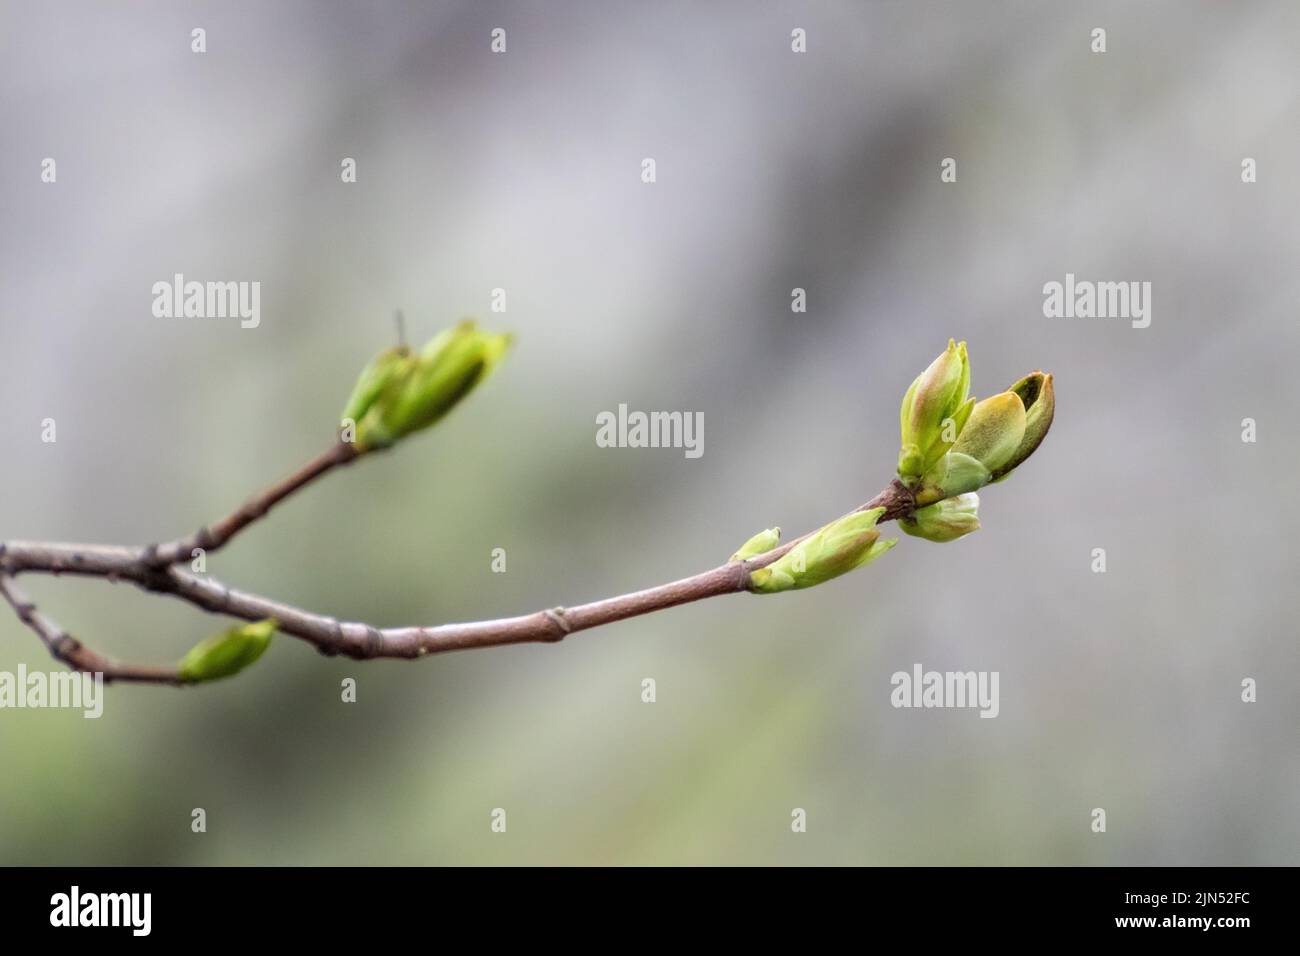 Young tree branch with buds close-up on sunny spring day with blurred background. New leaves growing on branches Stock Photo